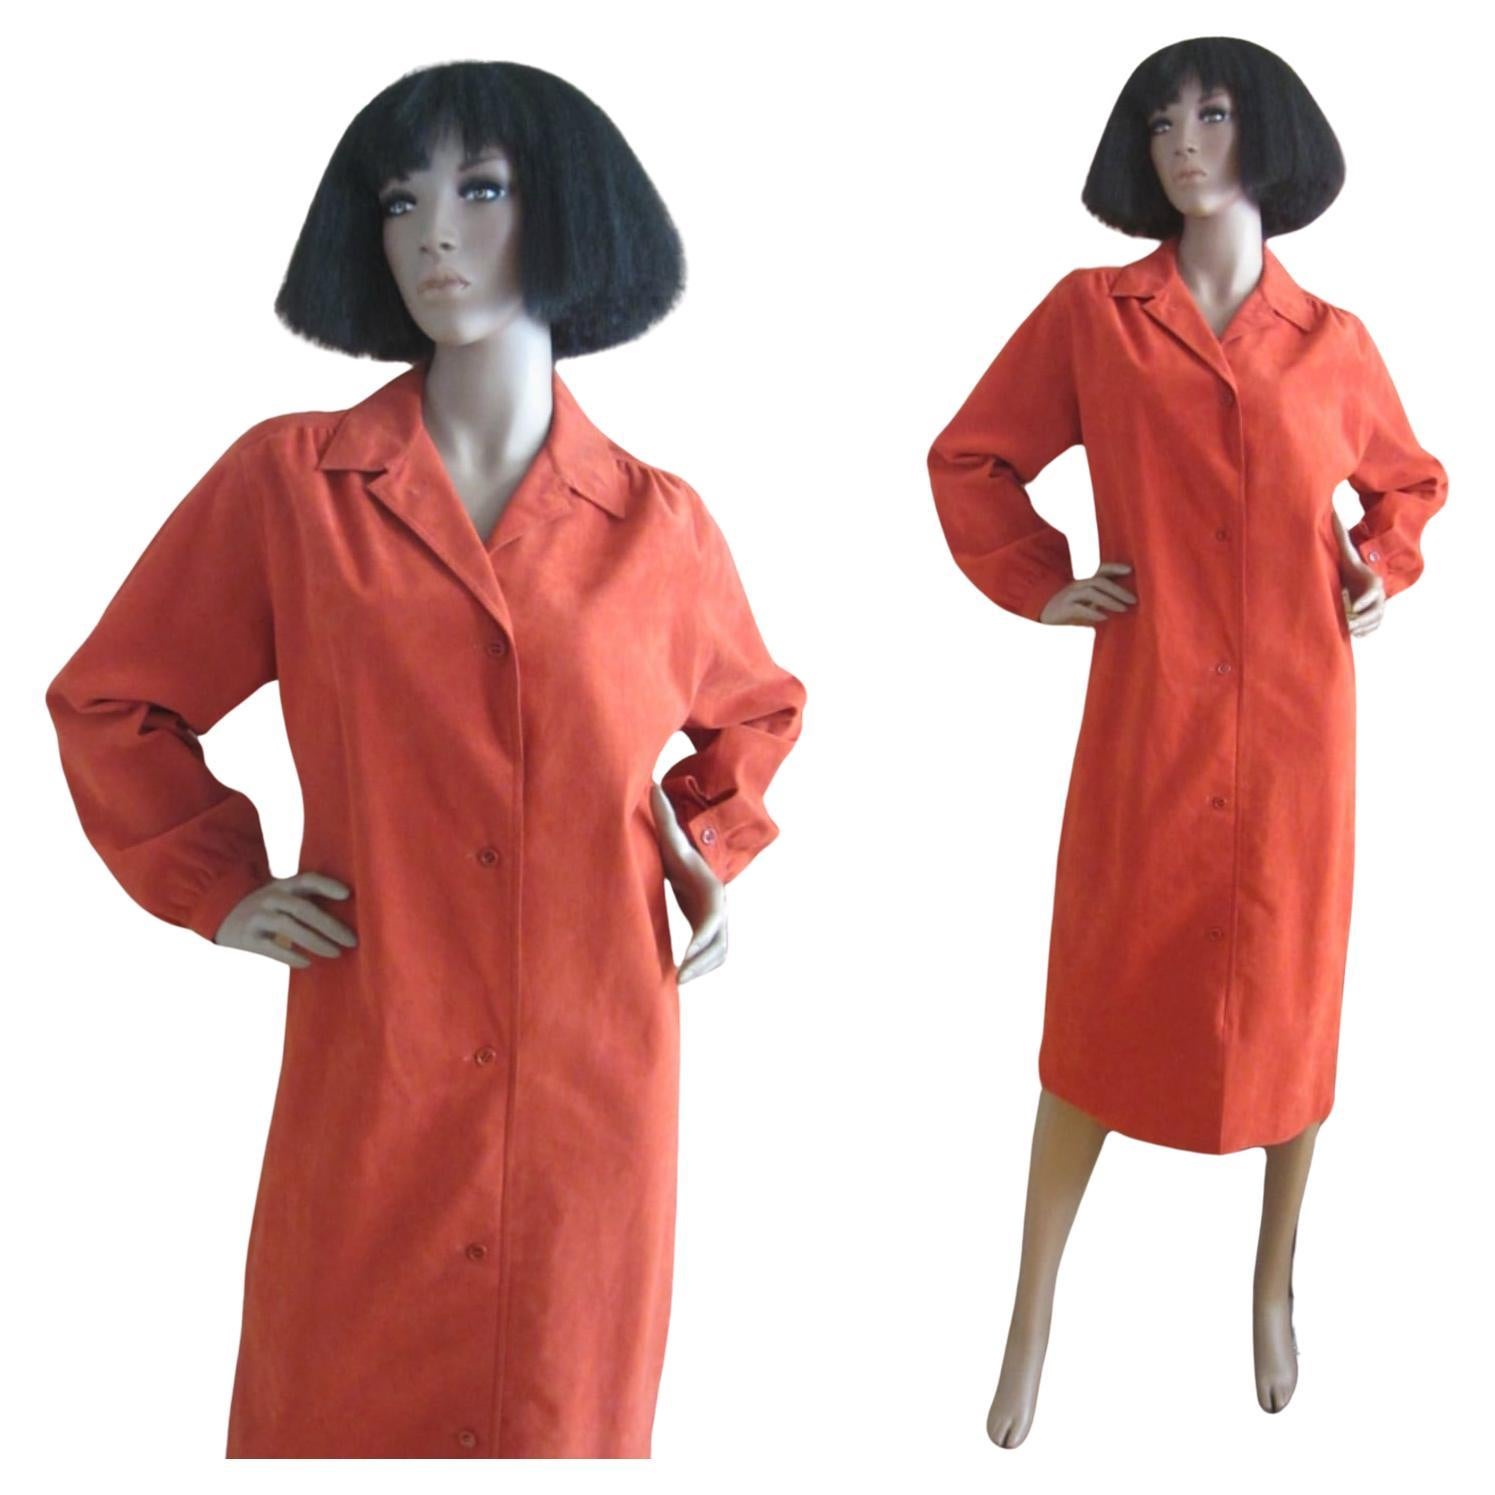 Halston Burnt Orange Ultrasuede Dress, Circa 1970s In Excellent Condition For Sale In Brooklyn, NY